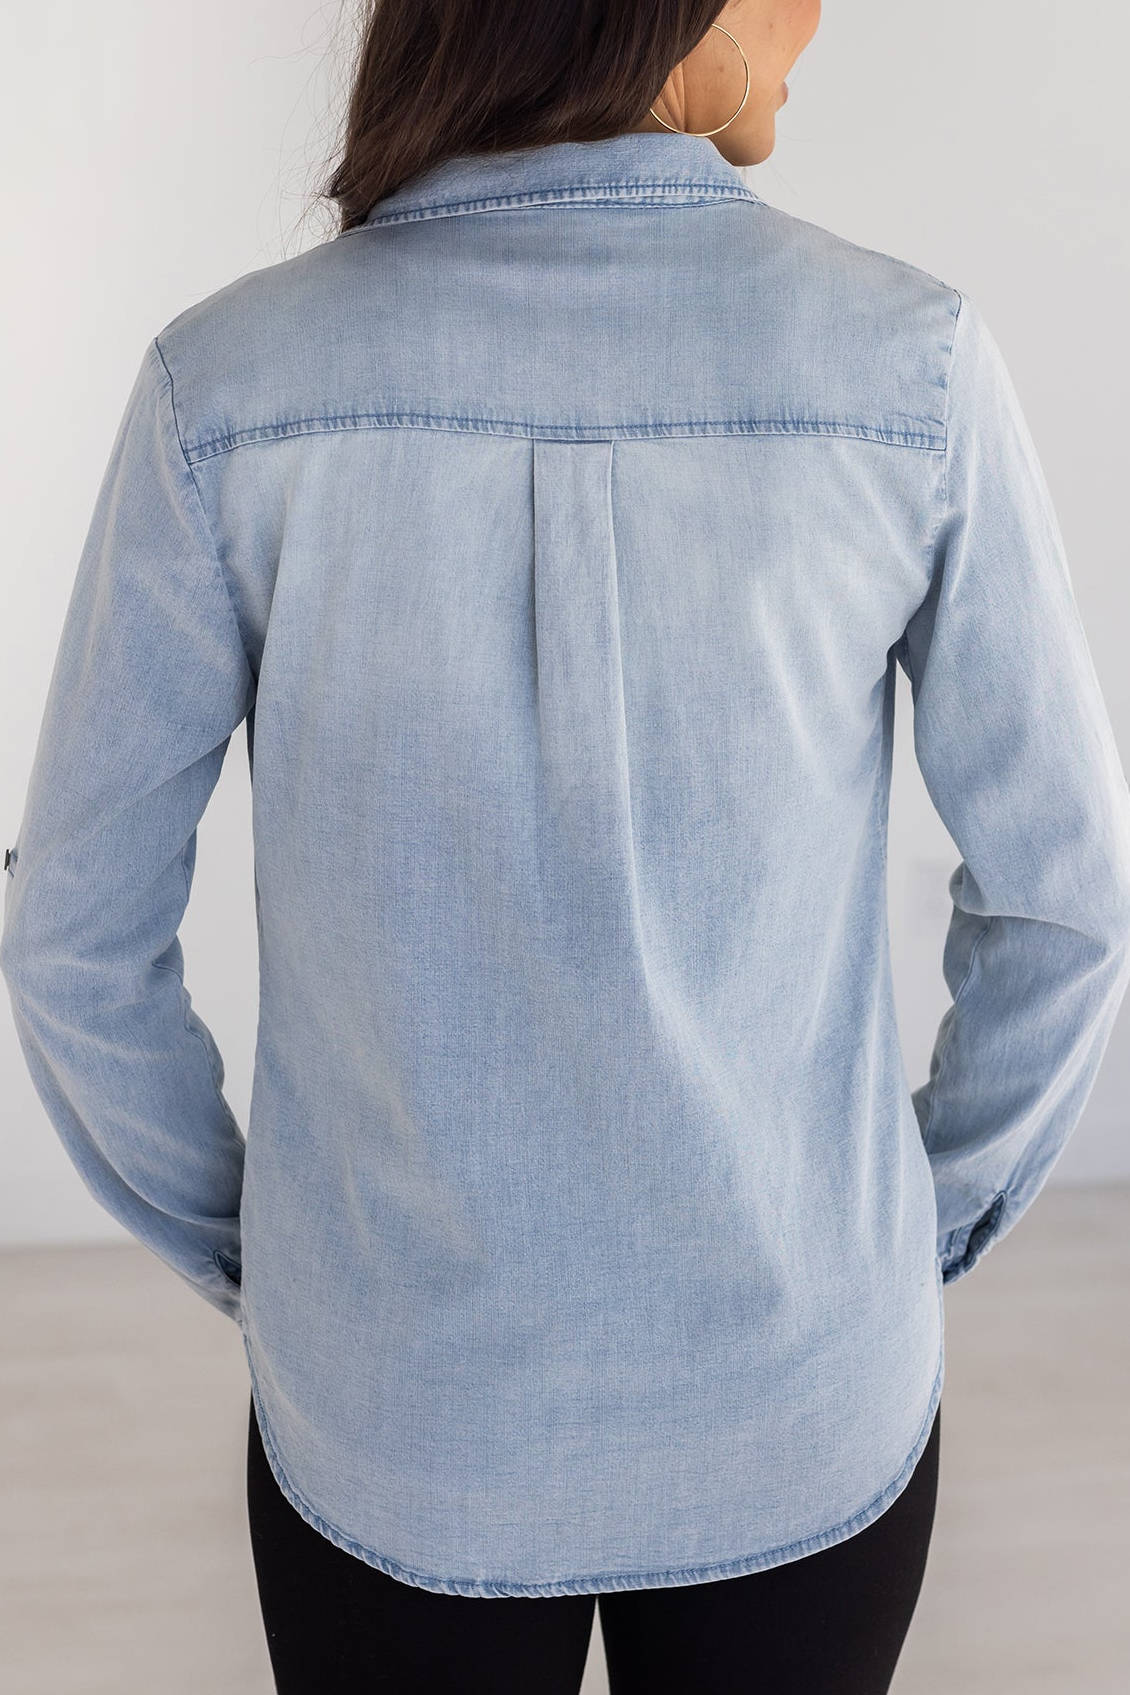 Grace & Lace Stretch Chambray Button Up